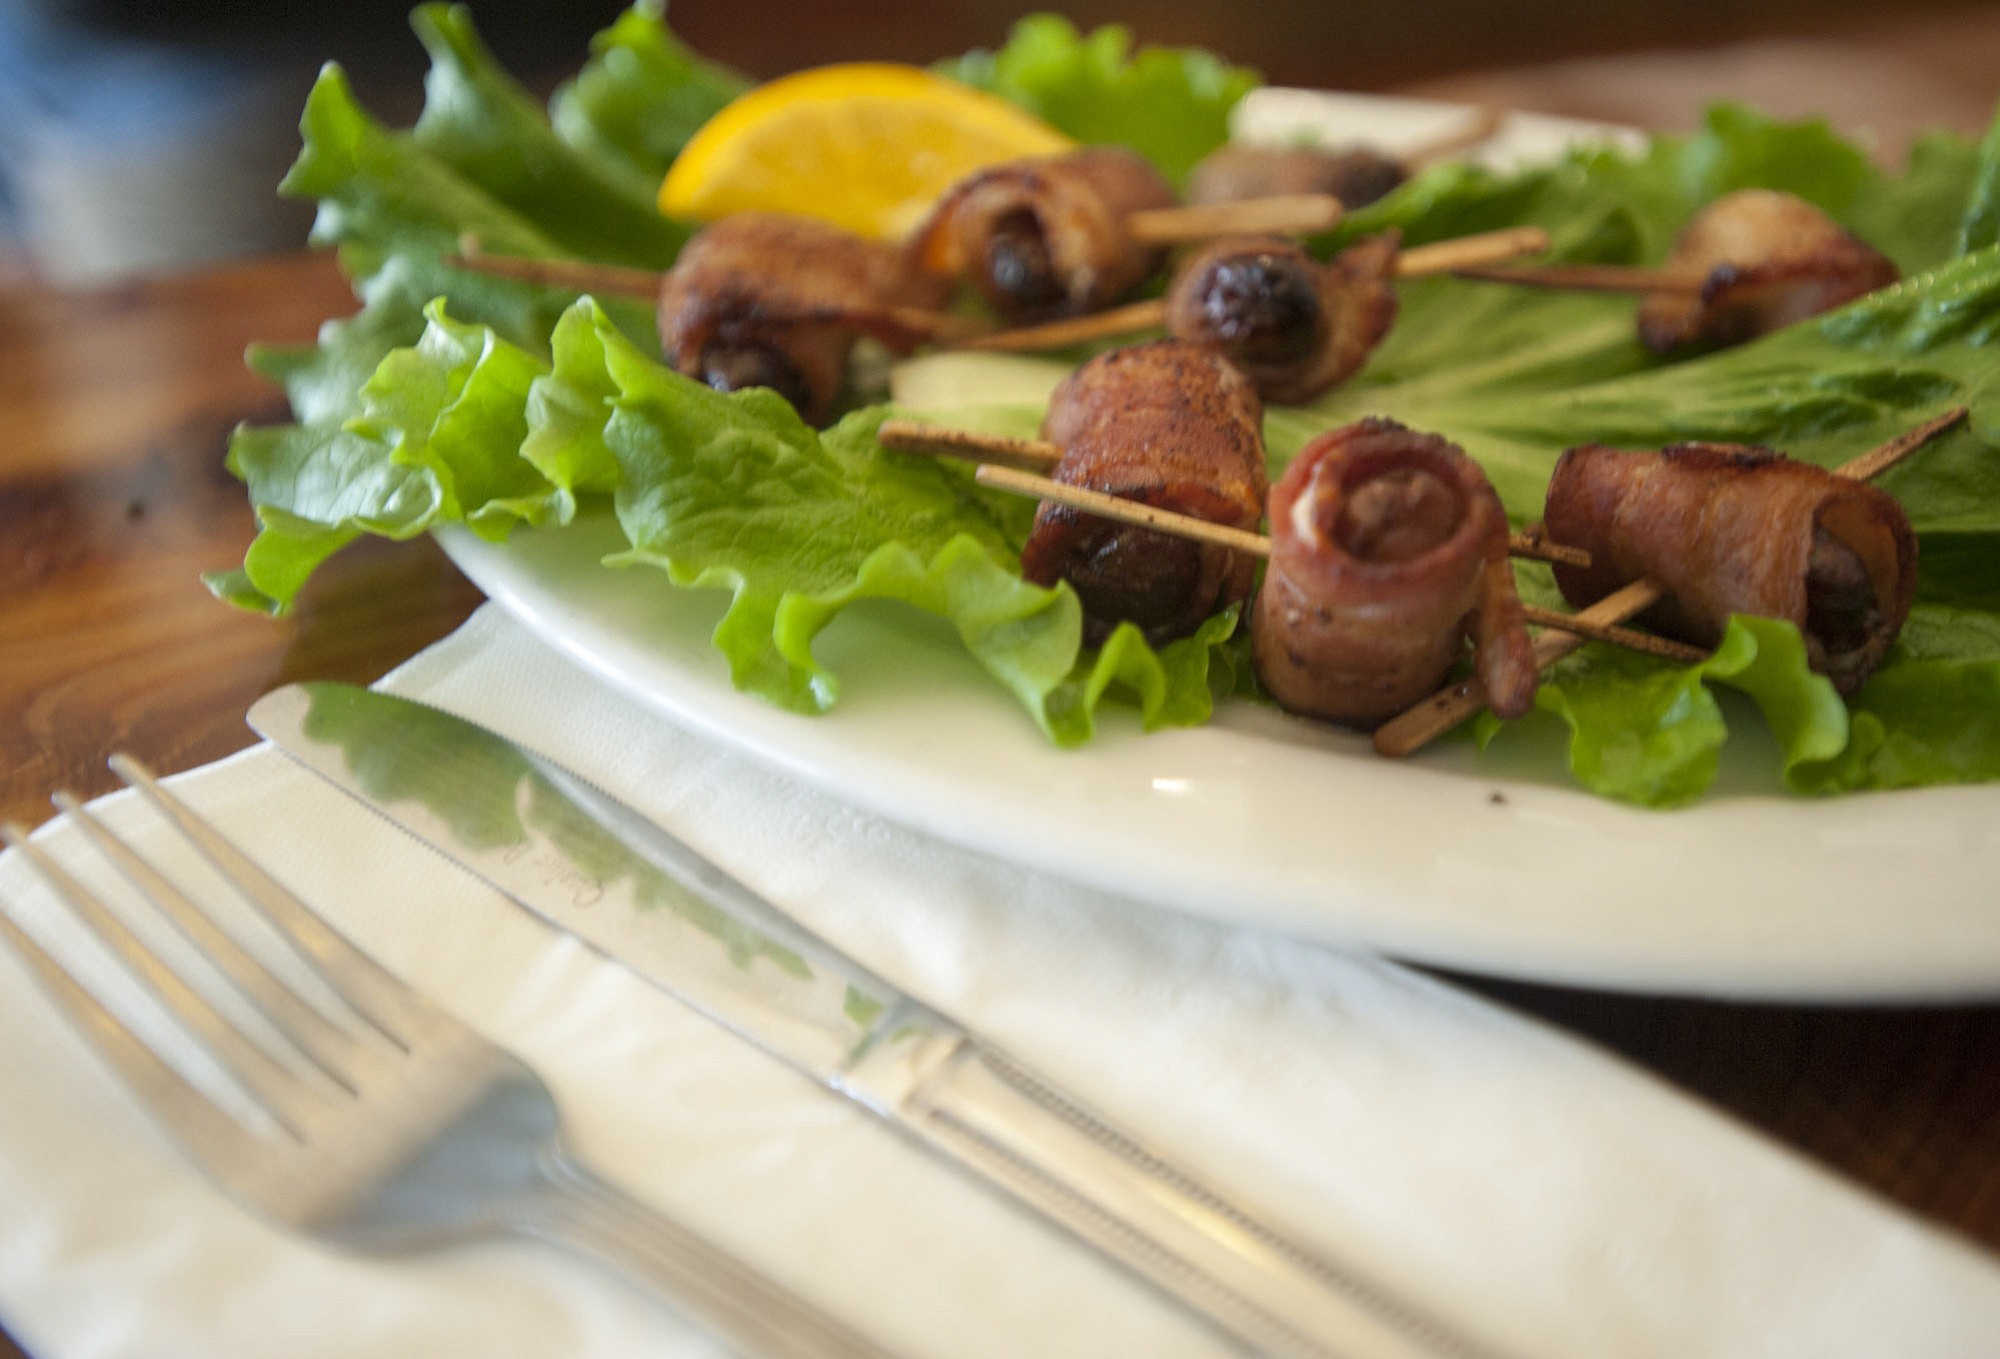 Bacon-wrapped dates are among the menu items at Brewed Cafe &amp; Pub on Main Street in downtown Vancouver.